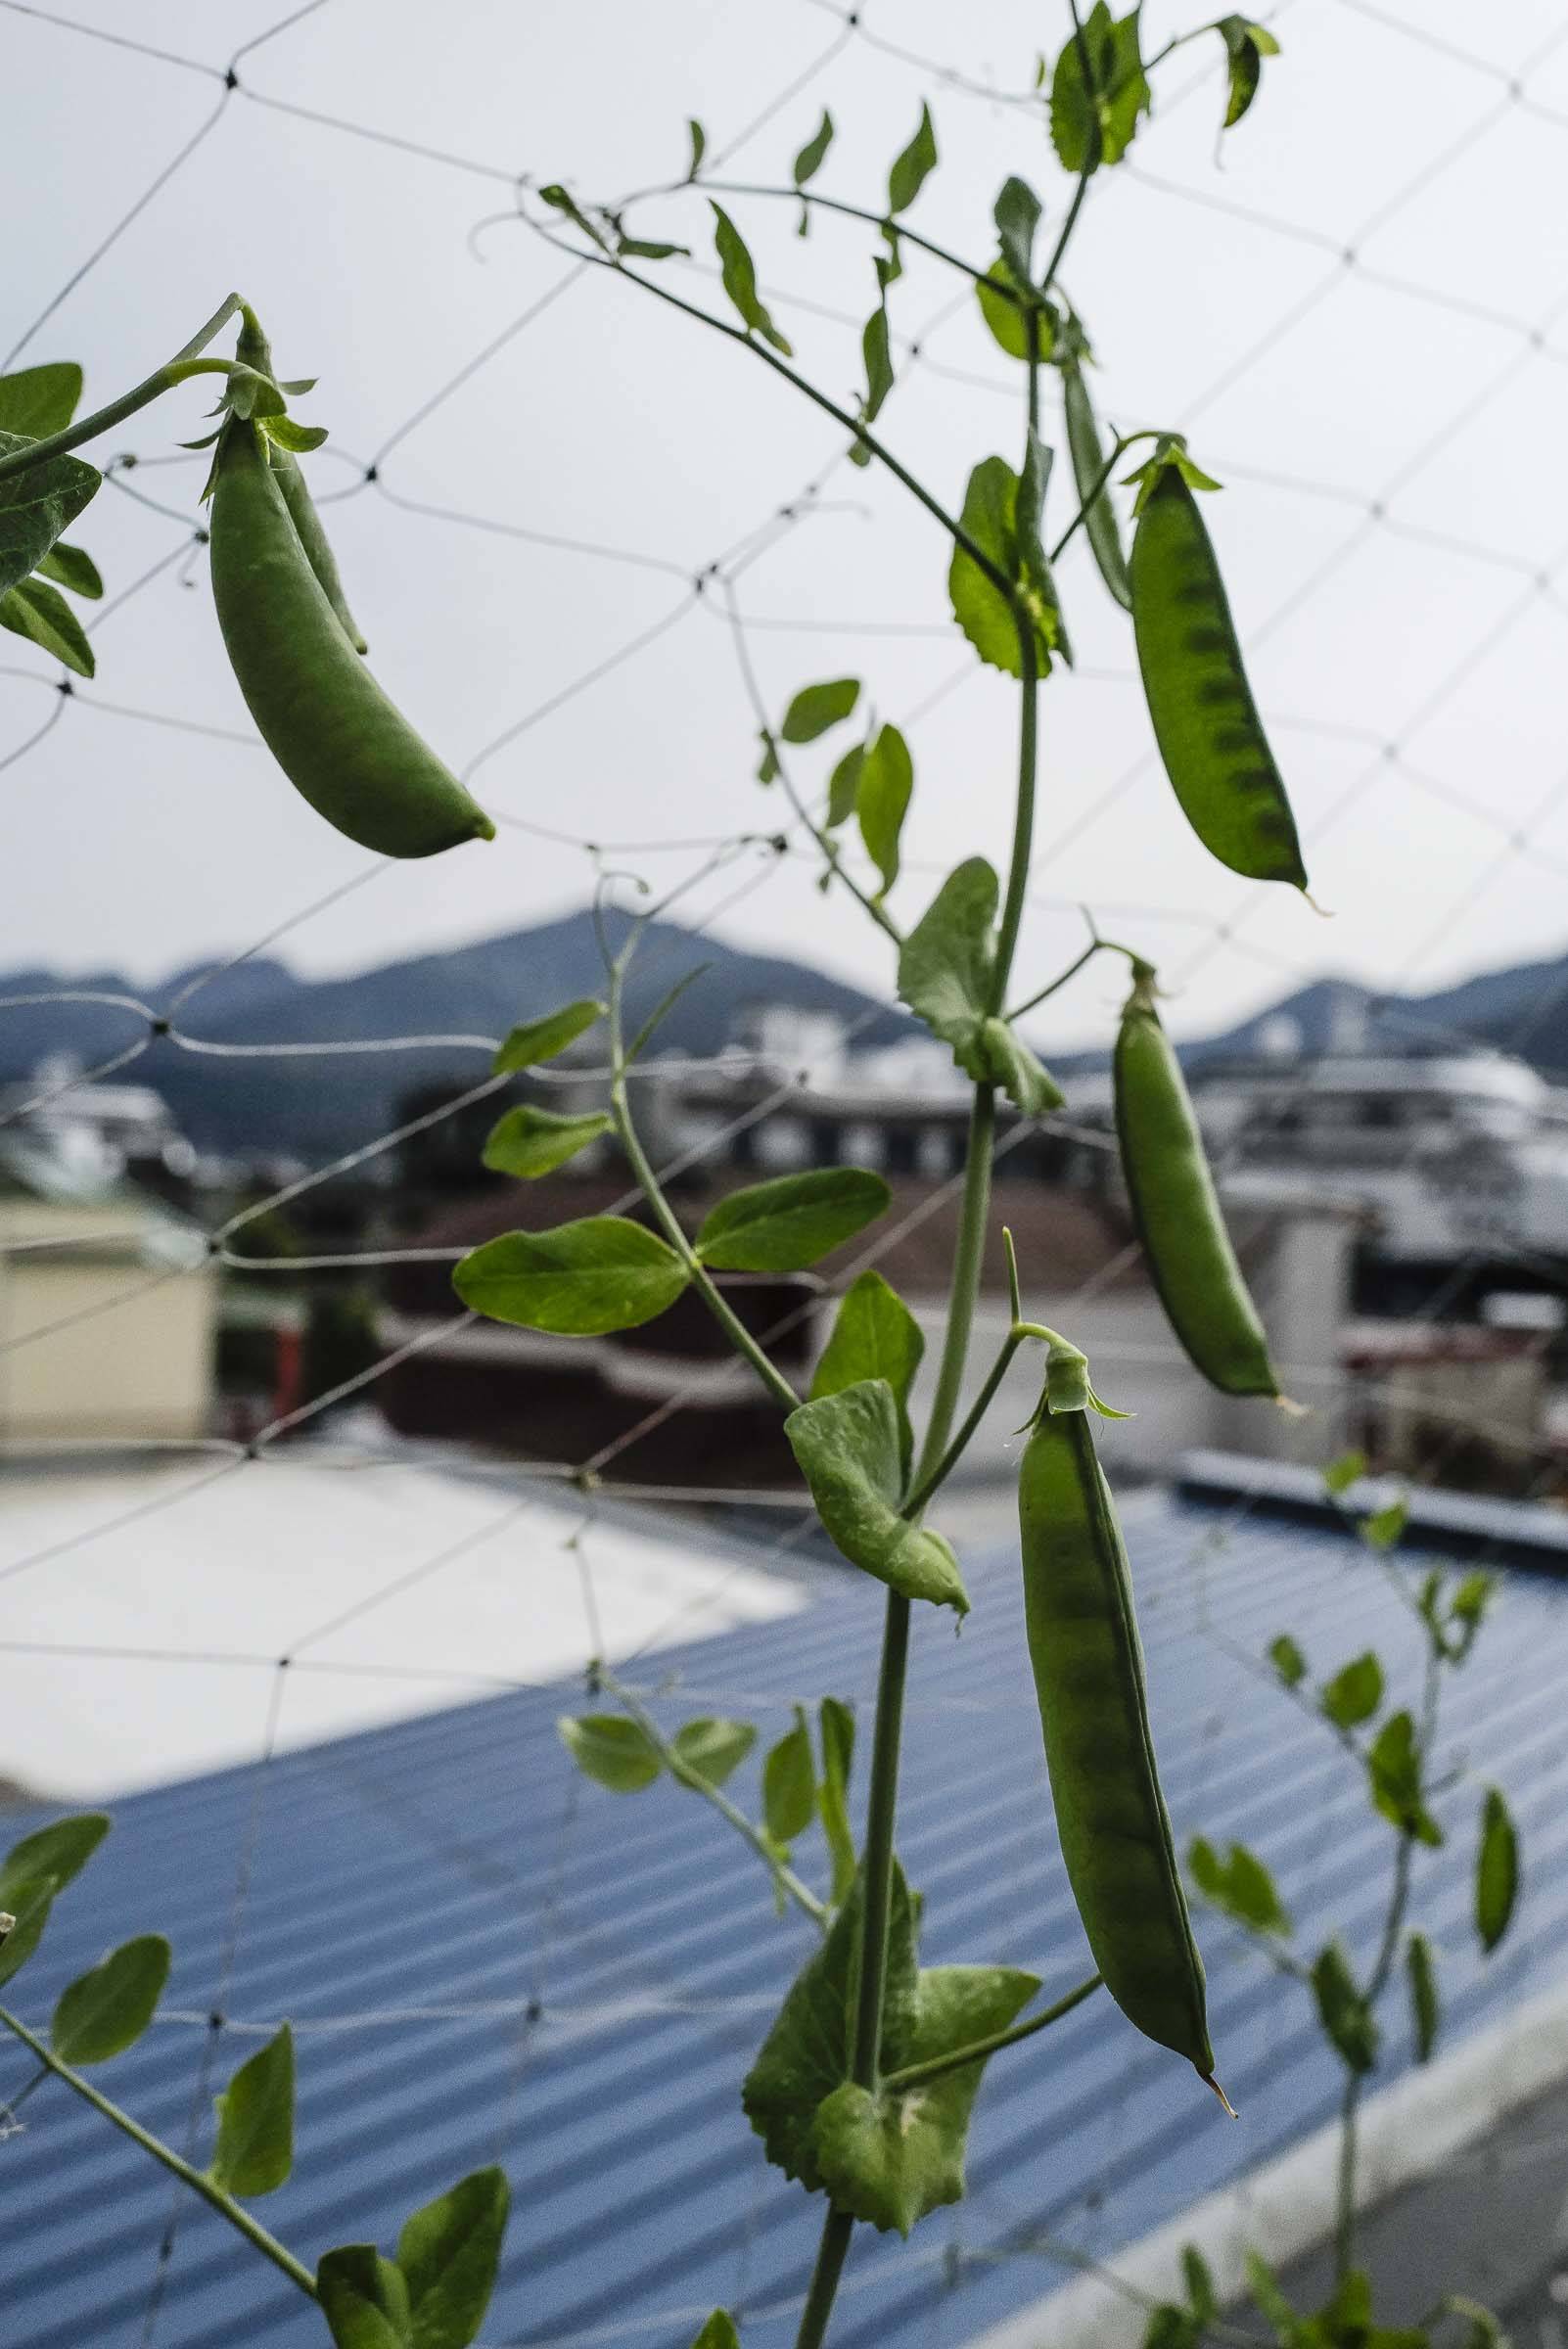 Peas growing on a roof top garden at the Glory Hall on Friday, Aug. 2, 2019. The produce in the garden is used daily in meals to feed patrons. (Michael Penn | Juneau Empire)